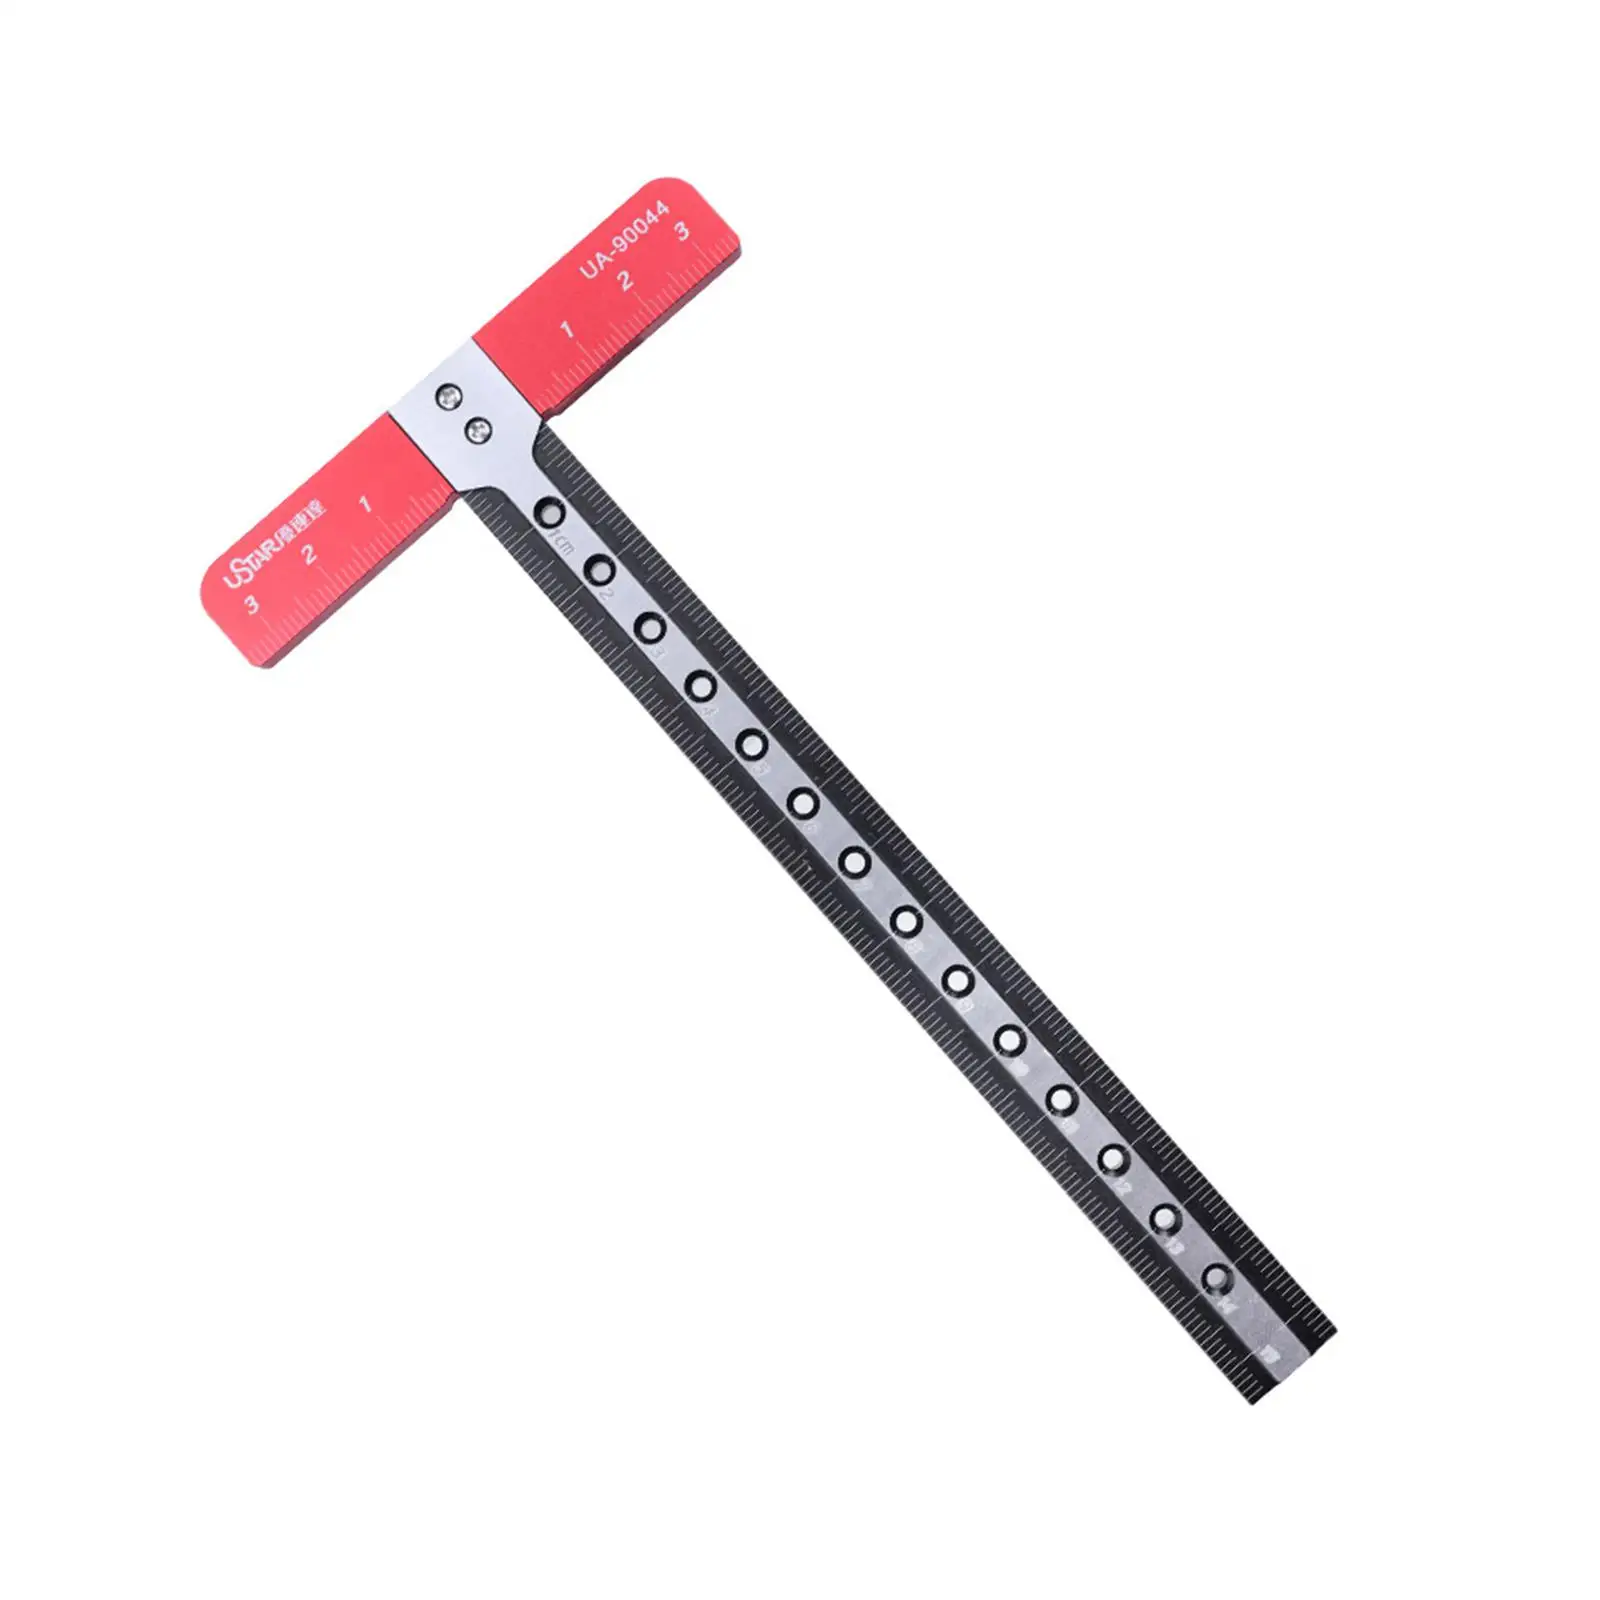 T Square Ruler Precise Angle Measure Tools Shape Positioning Ruler -90044 for Art Framing Drafting Tools Hobby DIY 170Mmx85mm